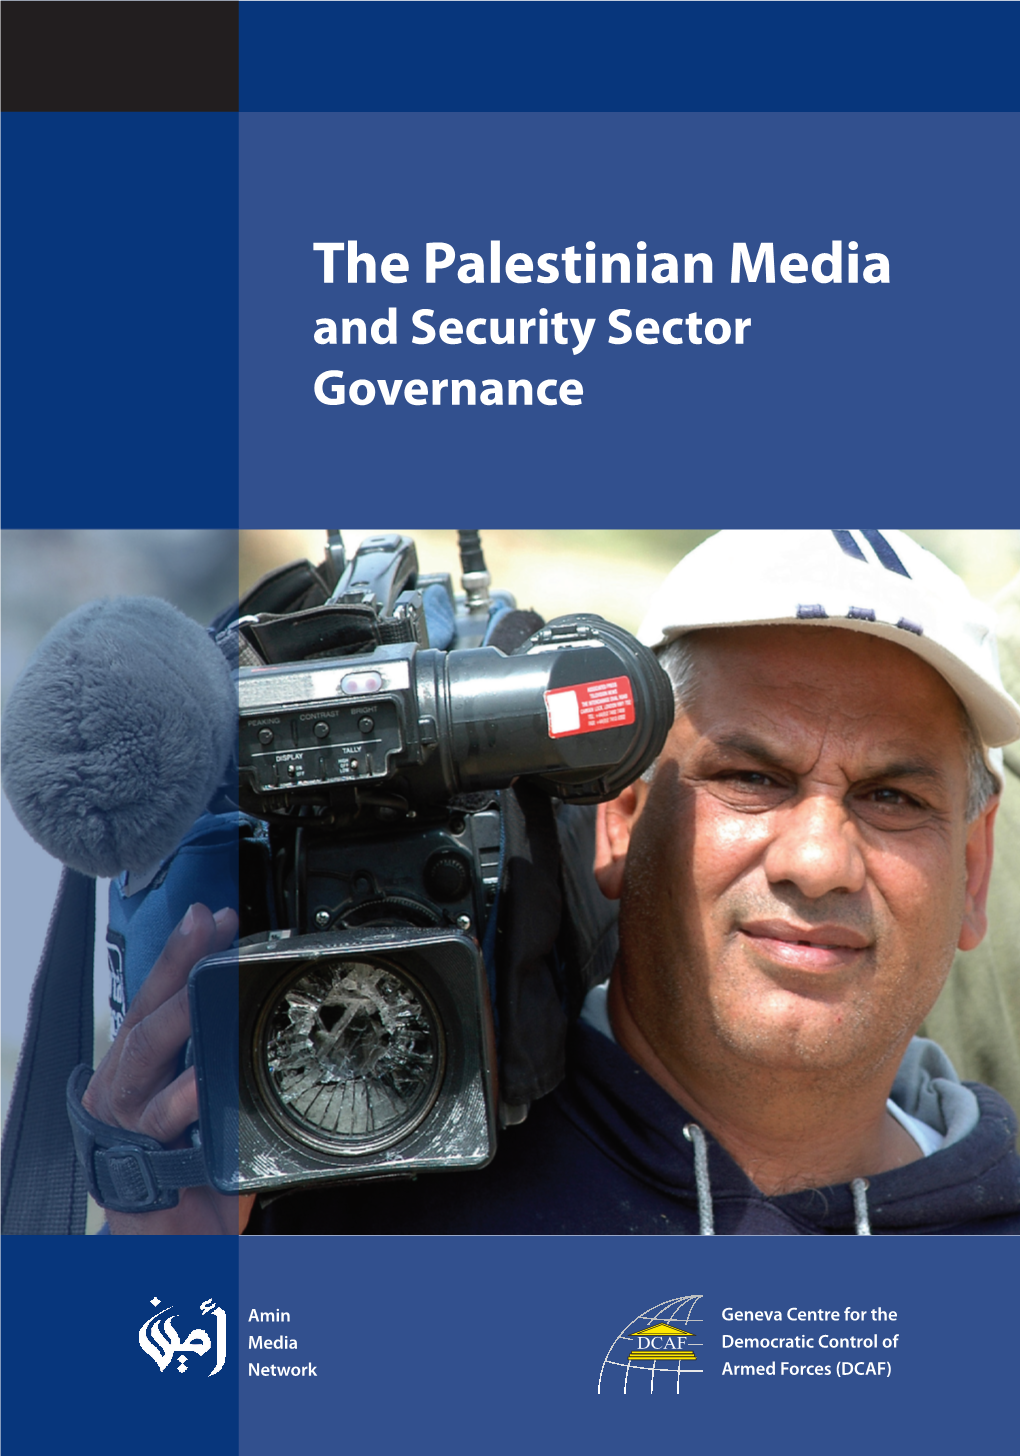 The Palestinian Media and Security Sector Governance